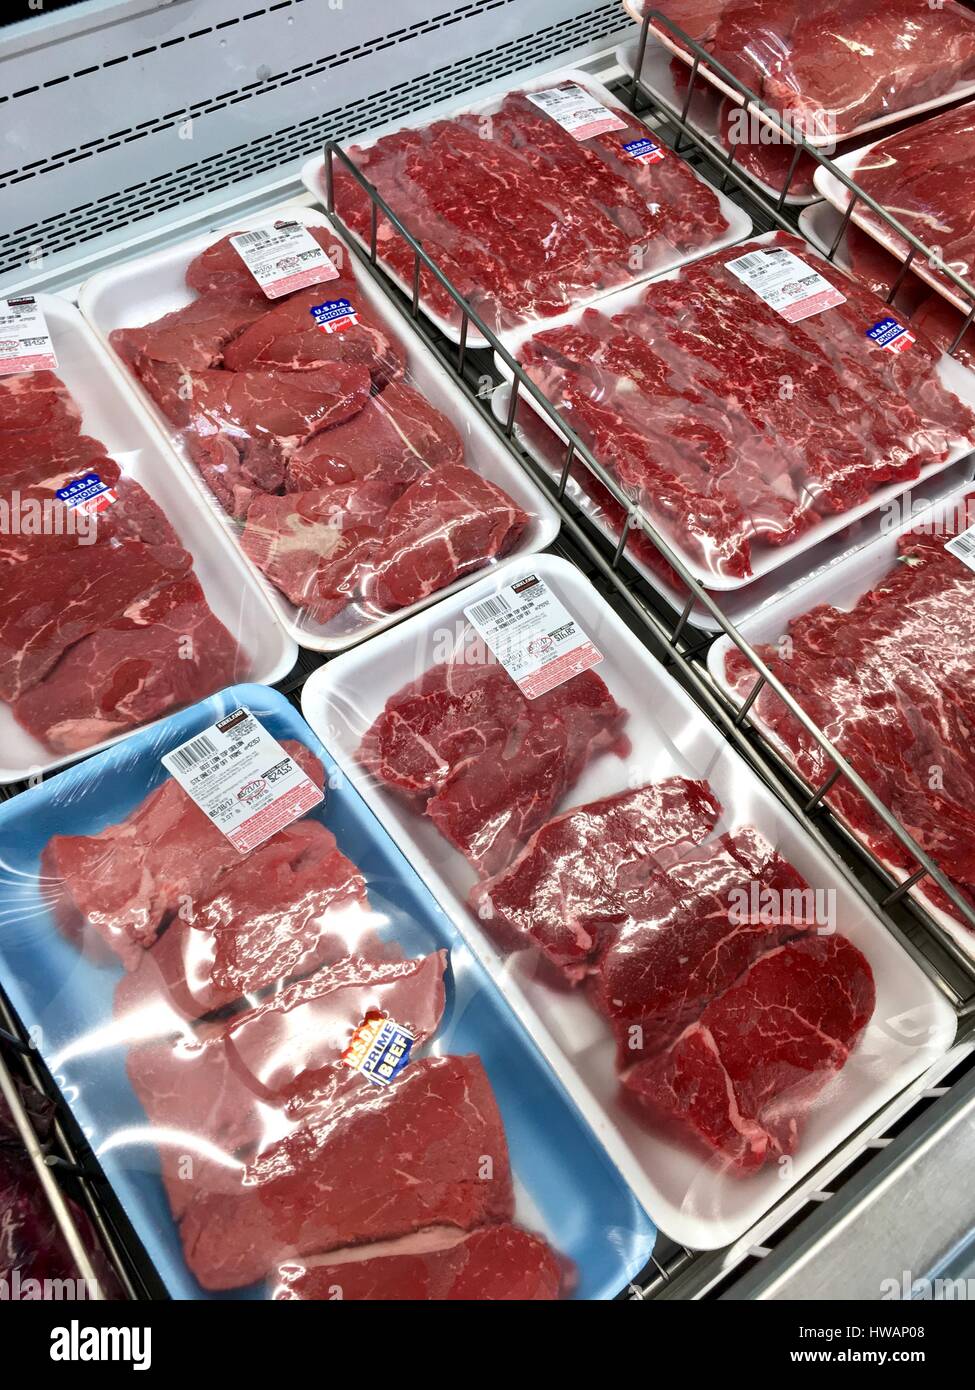 Costco fresh packed meat Stock Photo